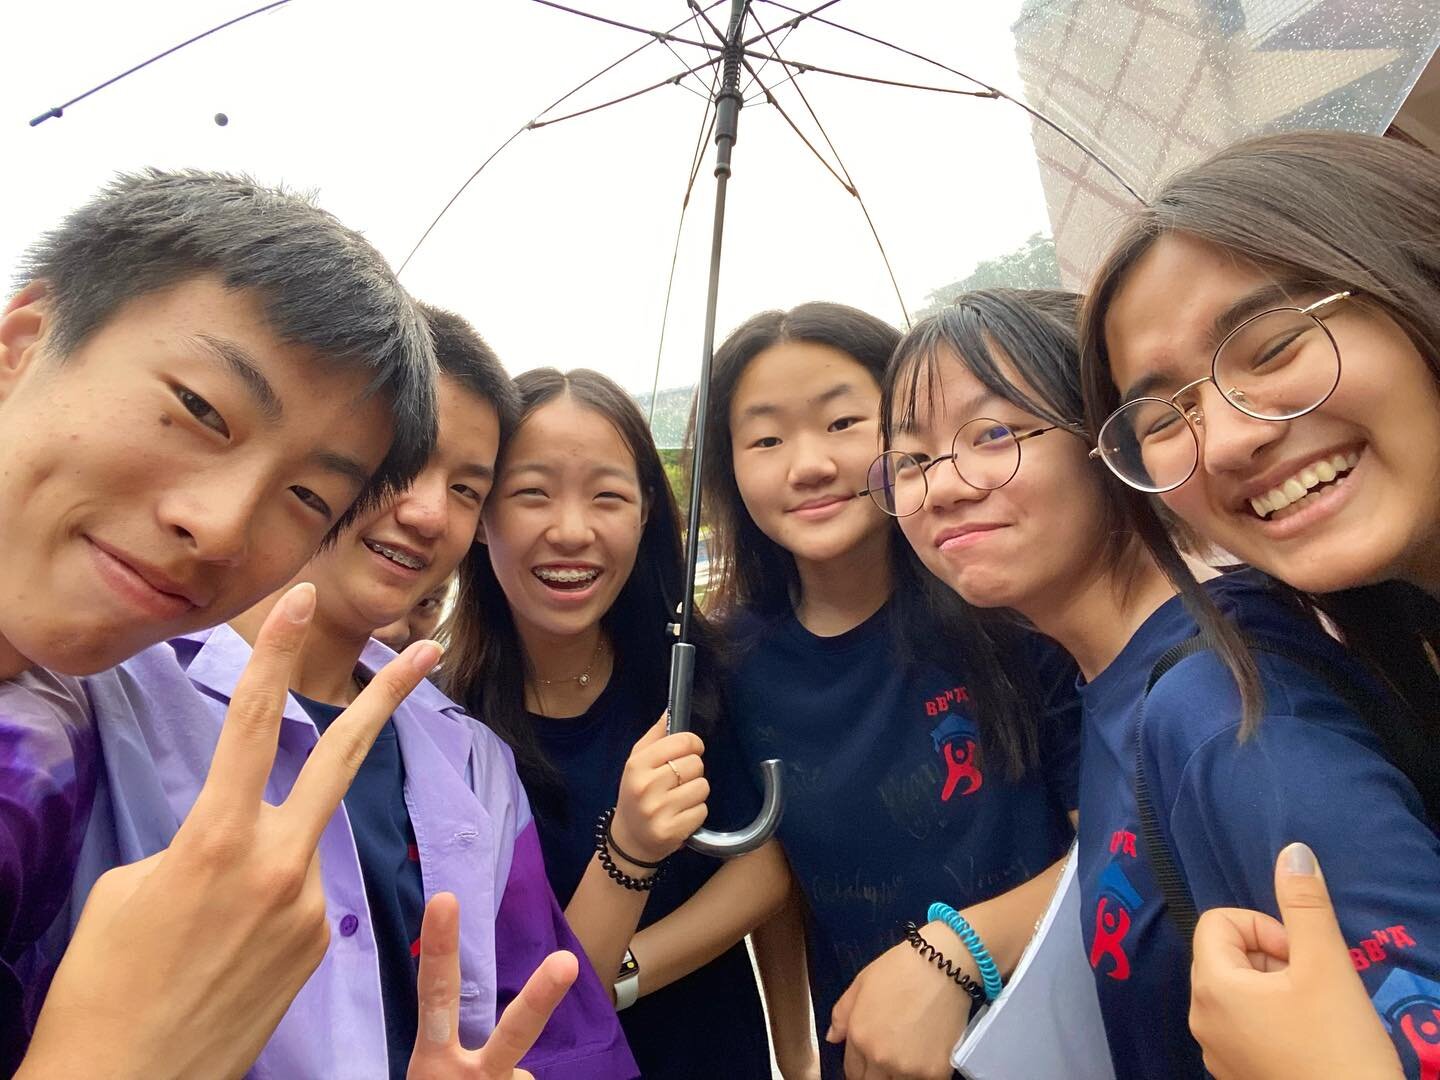 ☔️Rain or shine, you will have the best time with us in Taiwan.🌈🌦️ Refer your friends after applying to both get a discount off the application fee!

Hope everyone is staying dry and safe🤧

Learn more at the link in our bio or at connexpedition.co